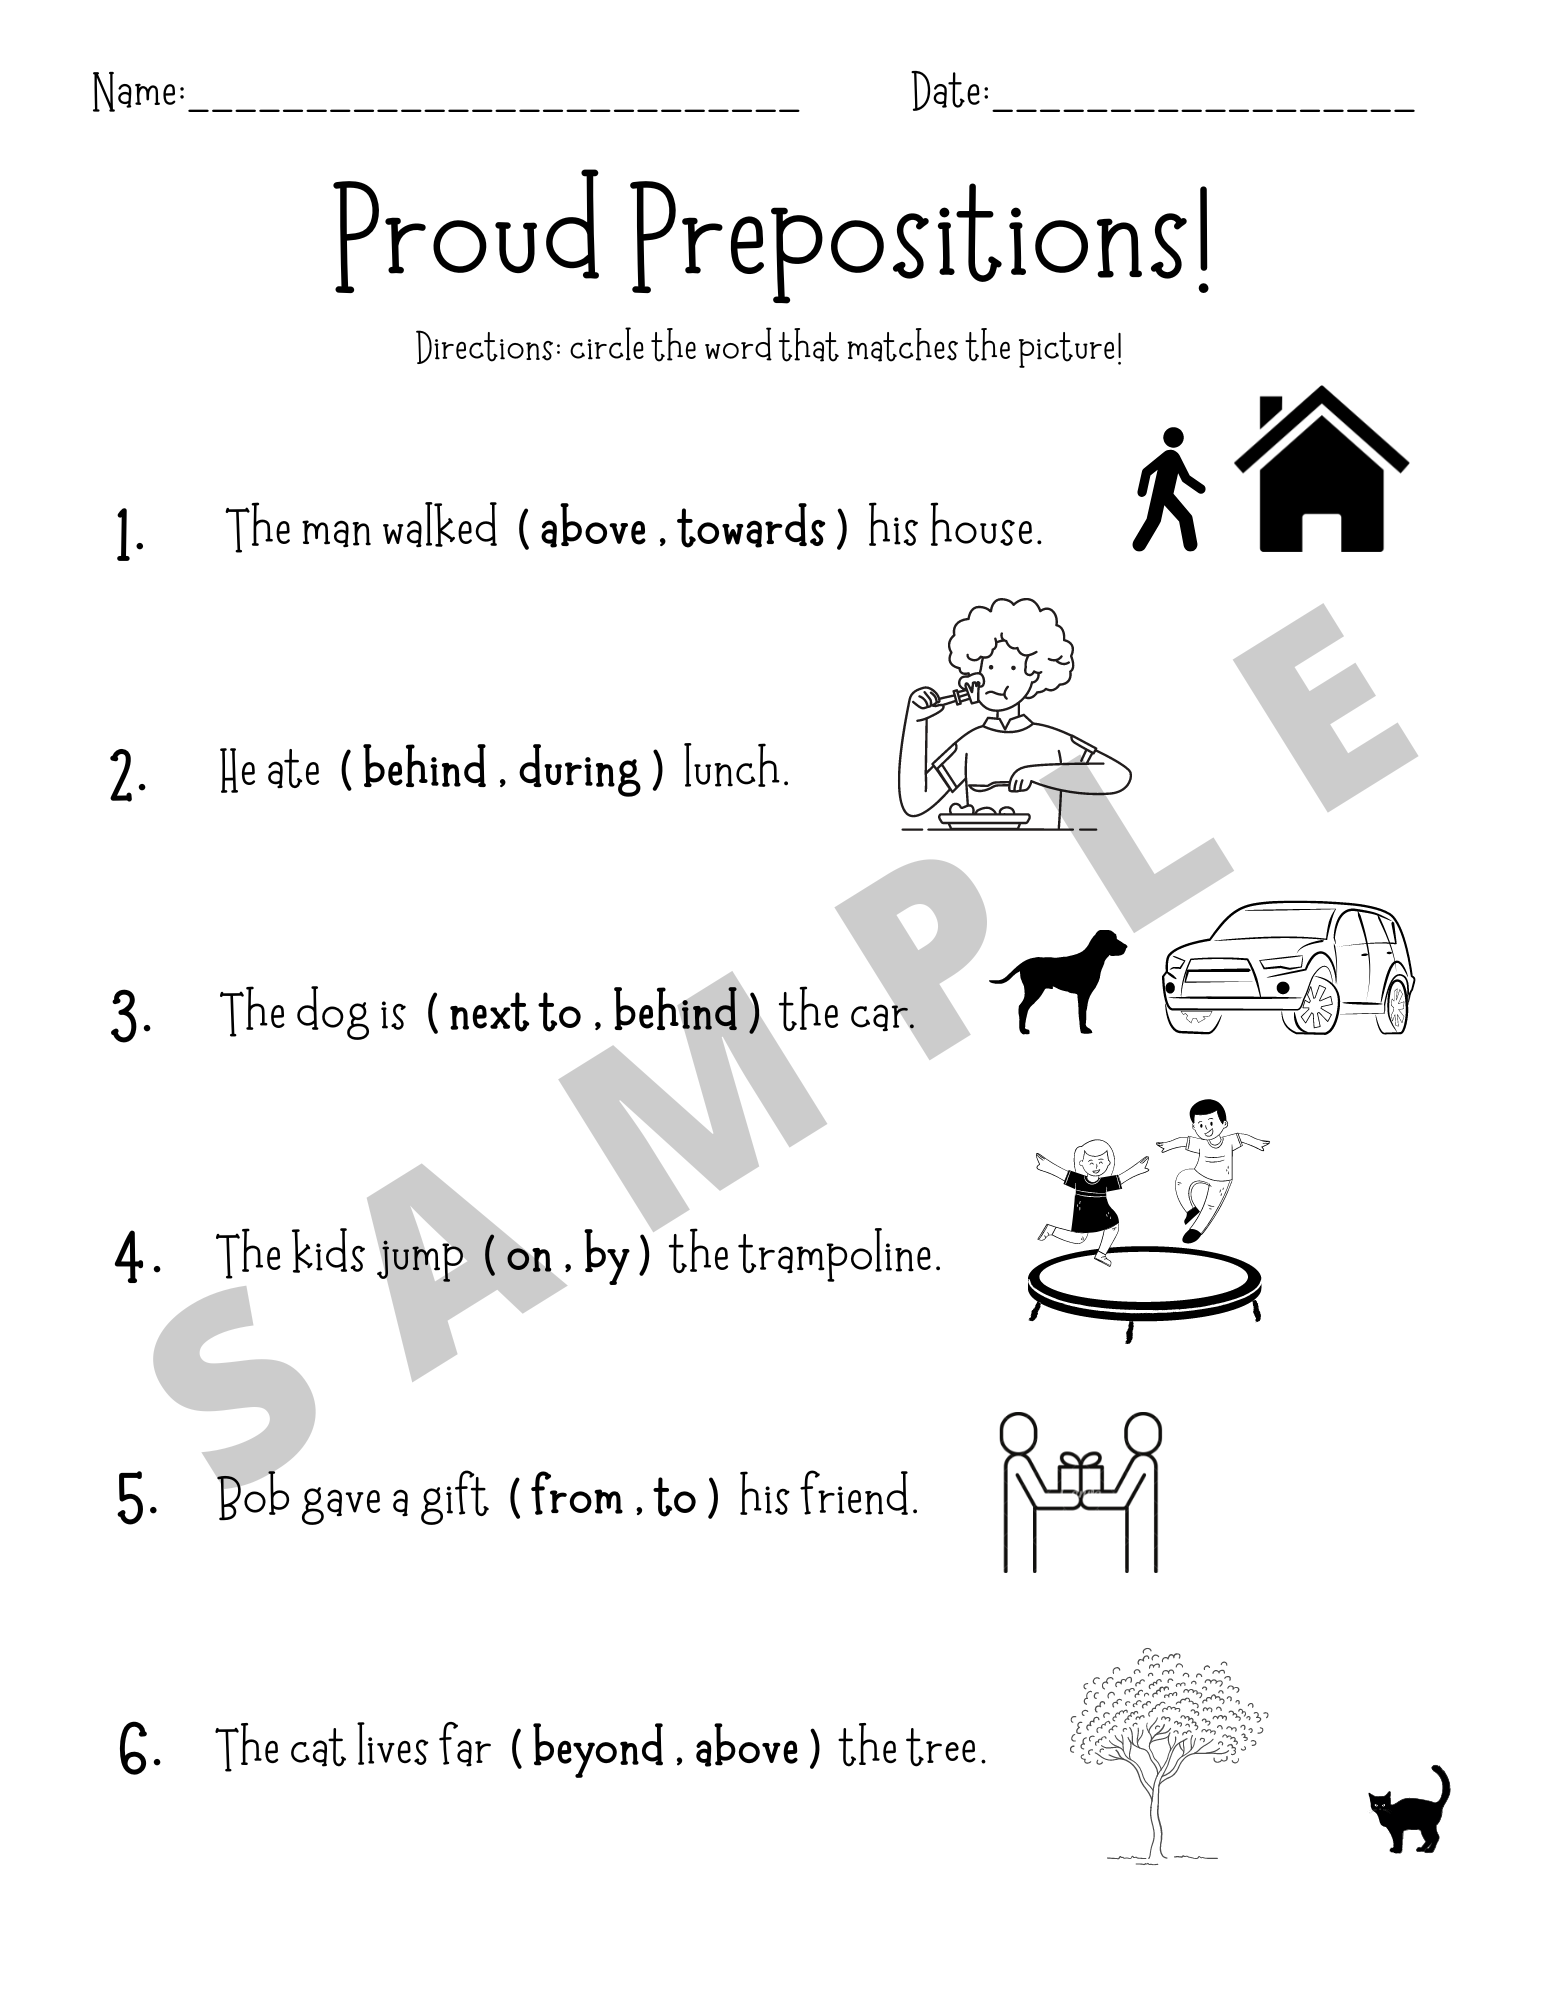 Prepositions Worksheet (Prepositional Phrases - Kindergarten & First Grade)  For K-5 Teachers and Students in Language Arts and Grammar Classrooms -  Classful